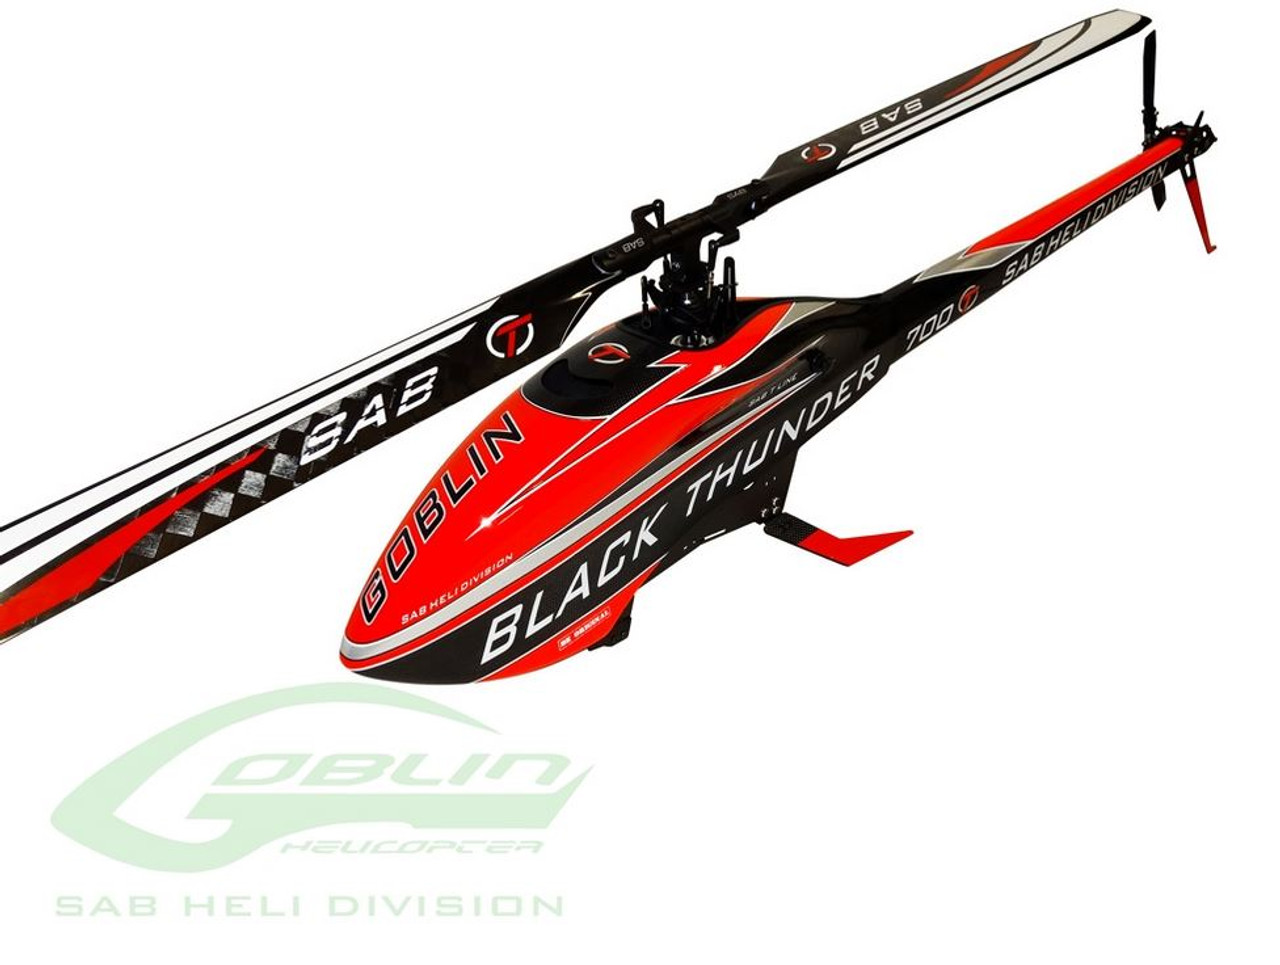 goblin rc helicopter